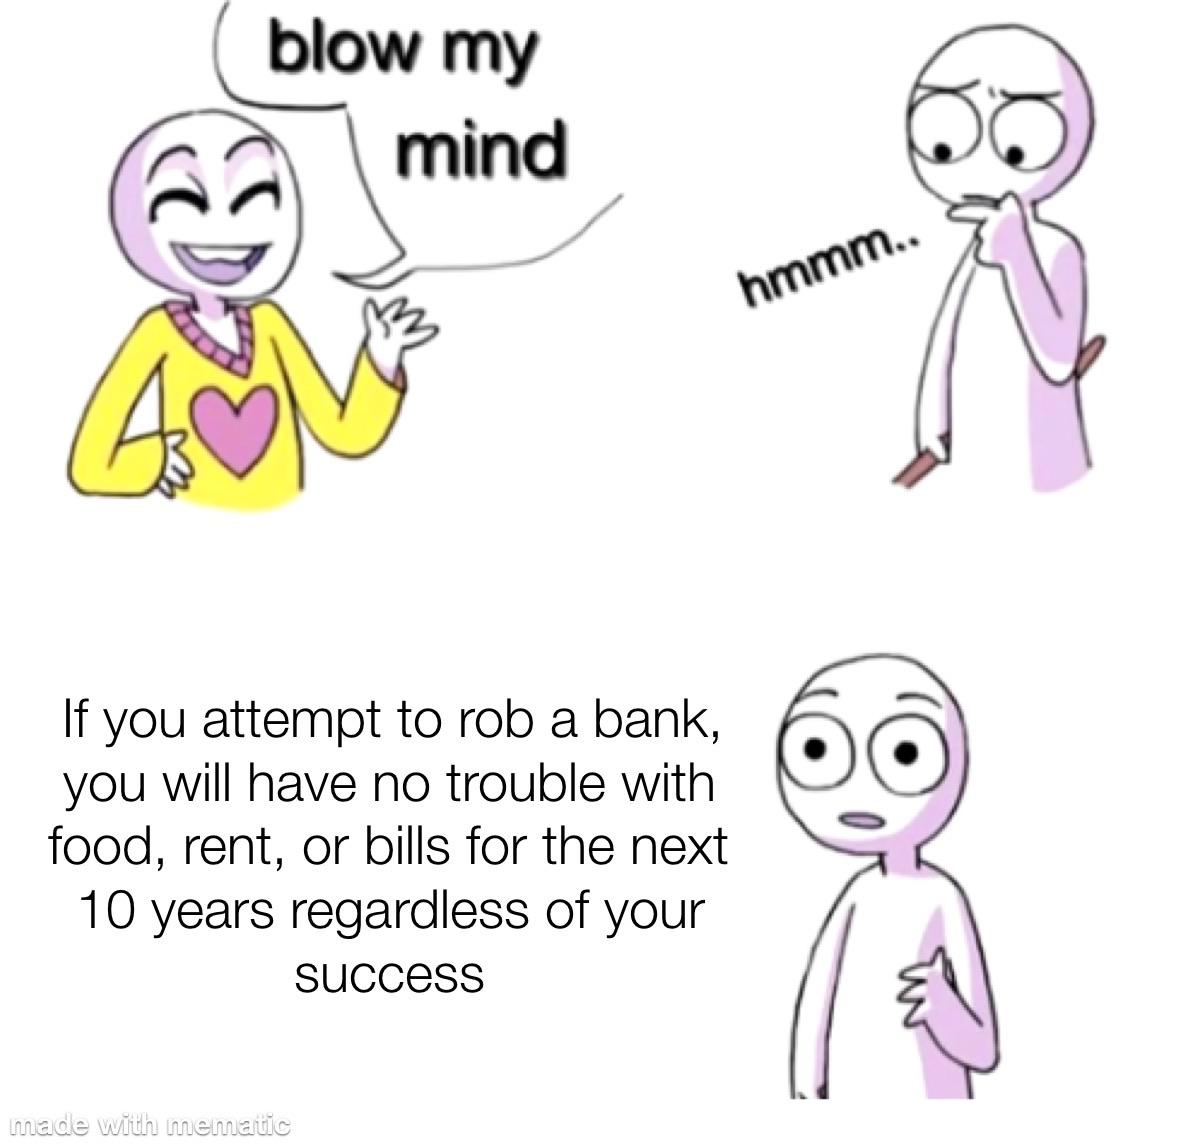 Funny,  other memes Funny,  text: blow my mind If you attempt to rob a bank, you will have no trouble with food, rent, or bills for the next 1 0 years regardless of your success oo 